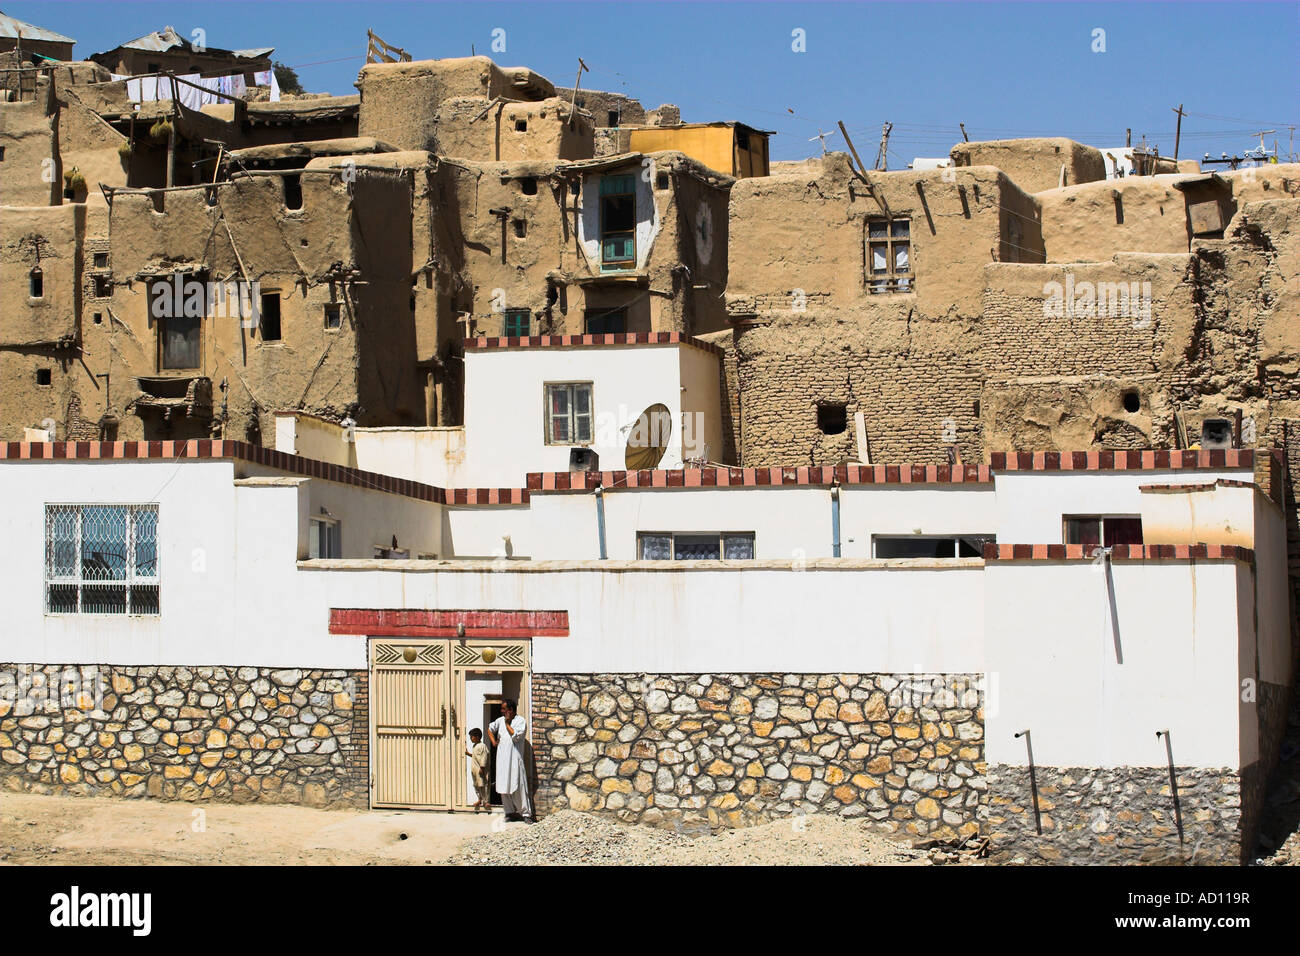 Afghanistan, Ghazni, Houses inside ancient walls of Citadel Stock Photo